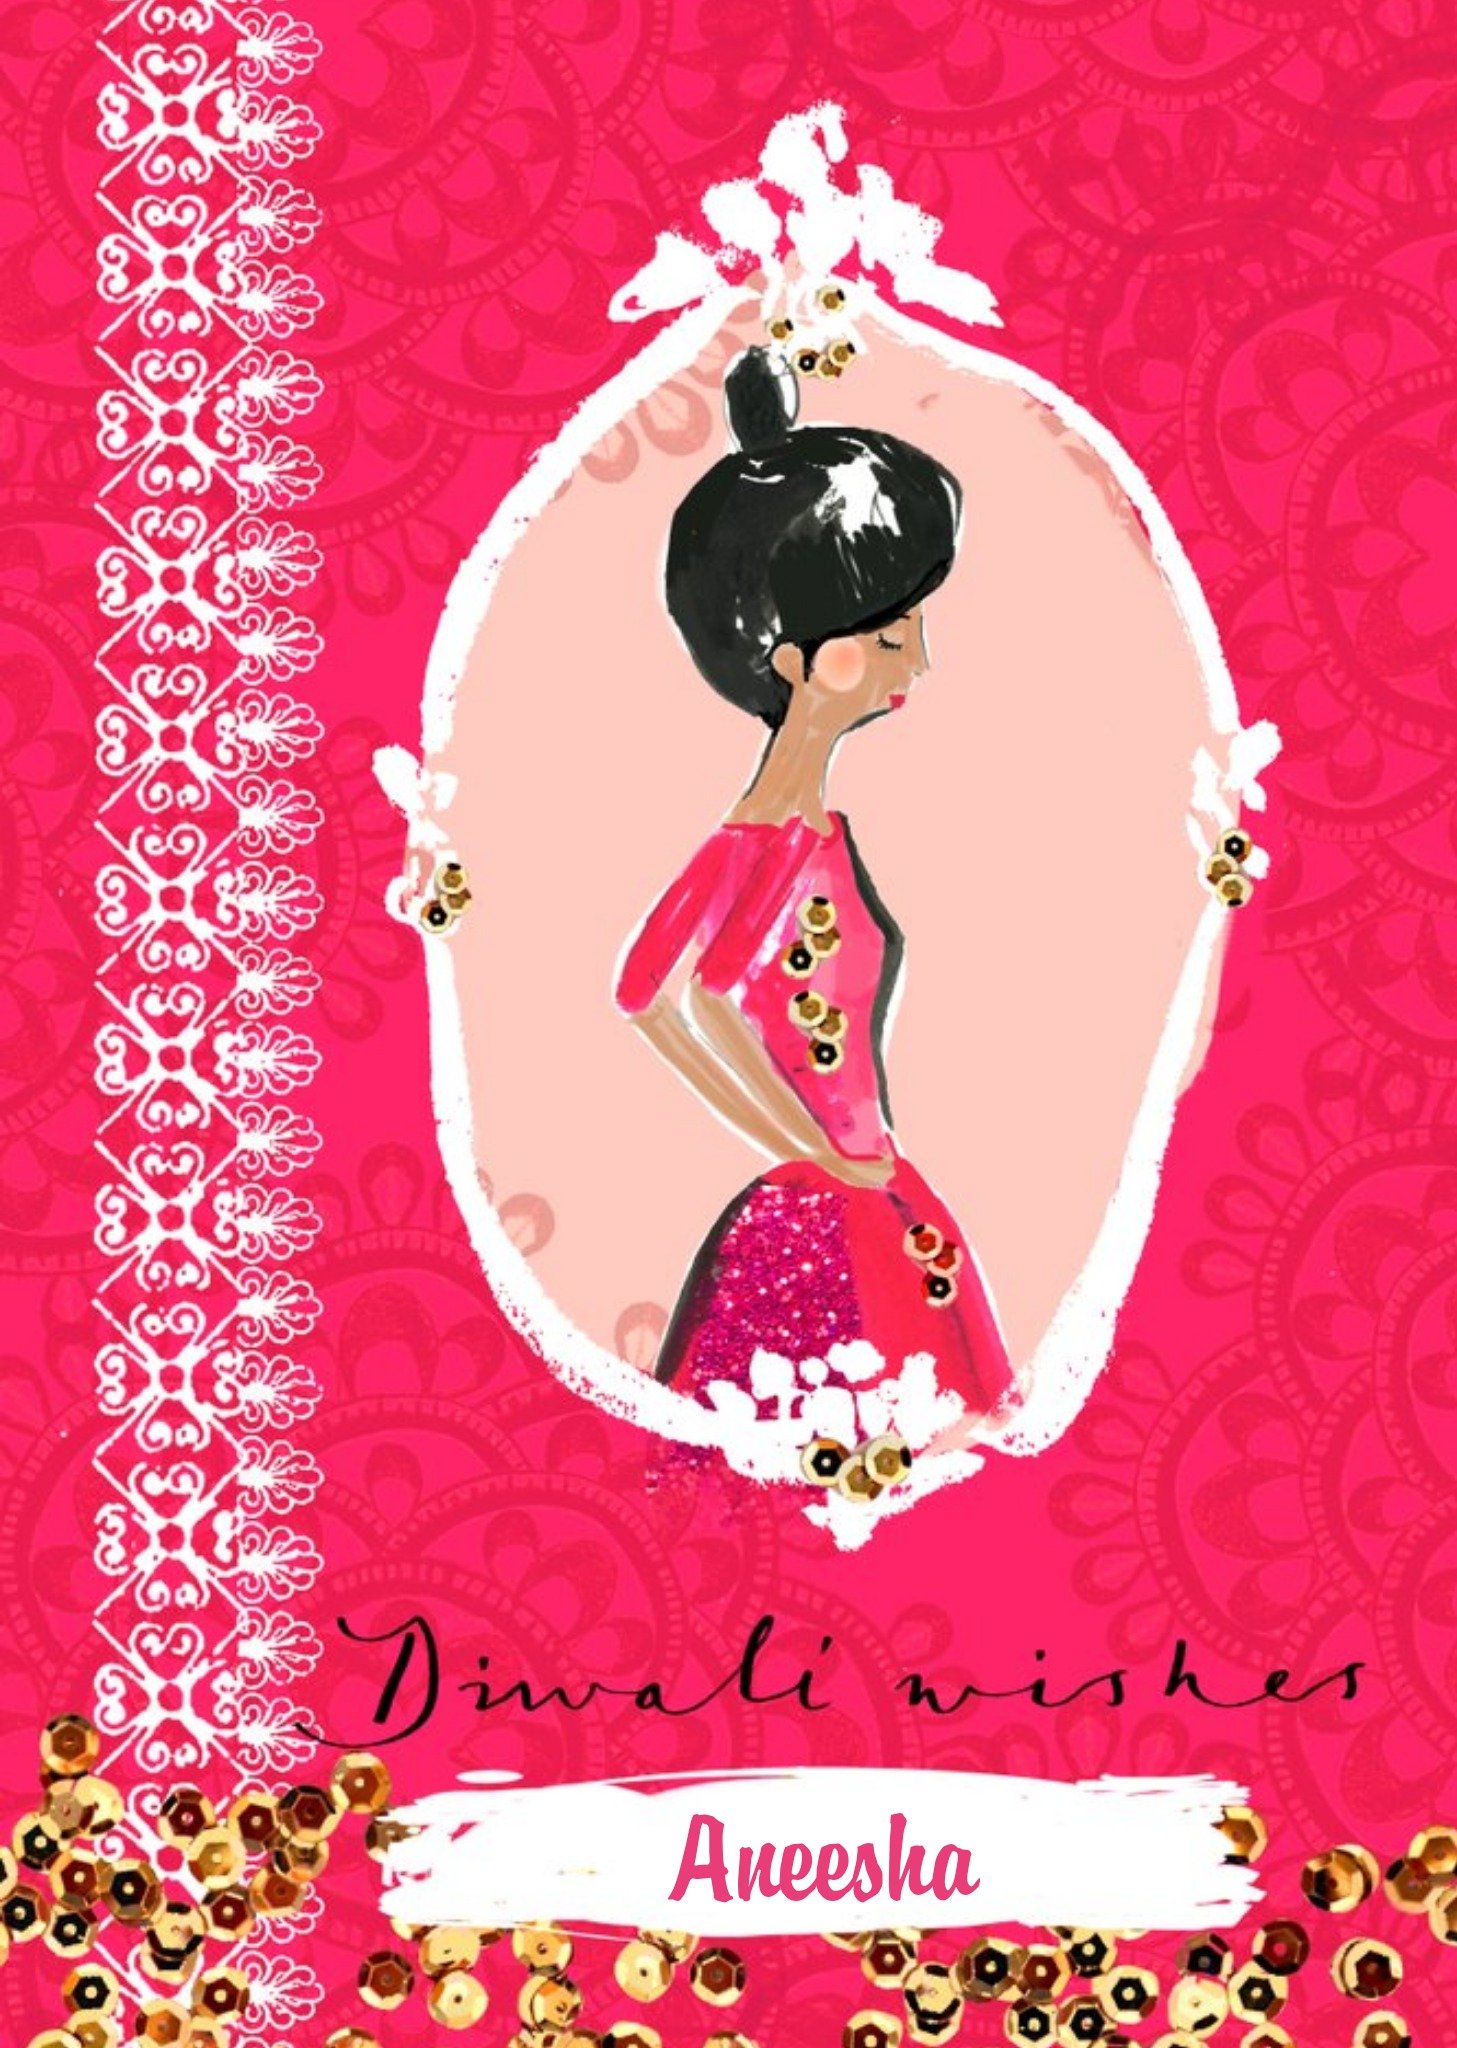 Moonpig Personalised Bright Pink Happy Diwali Wishes Card, Large